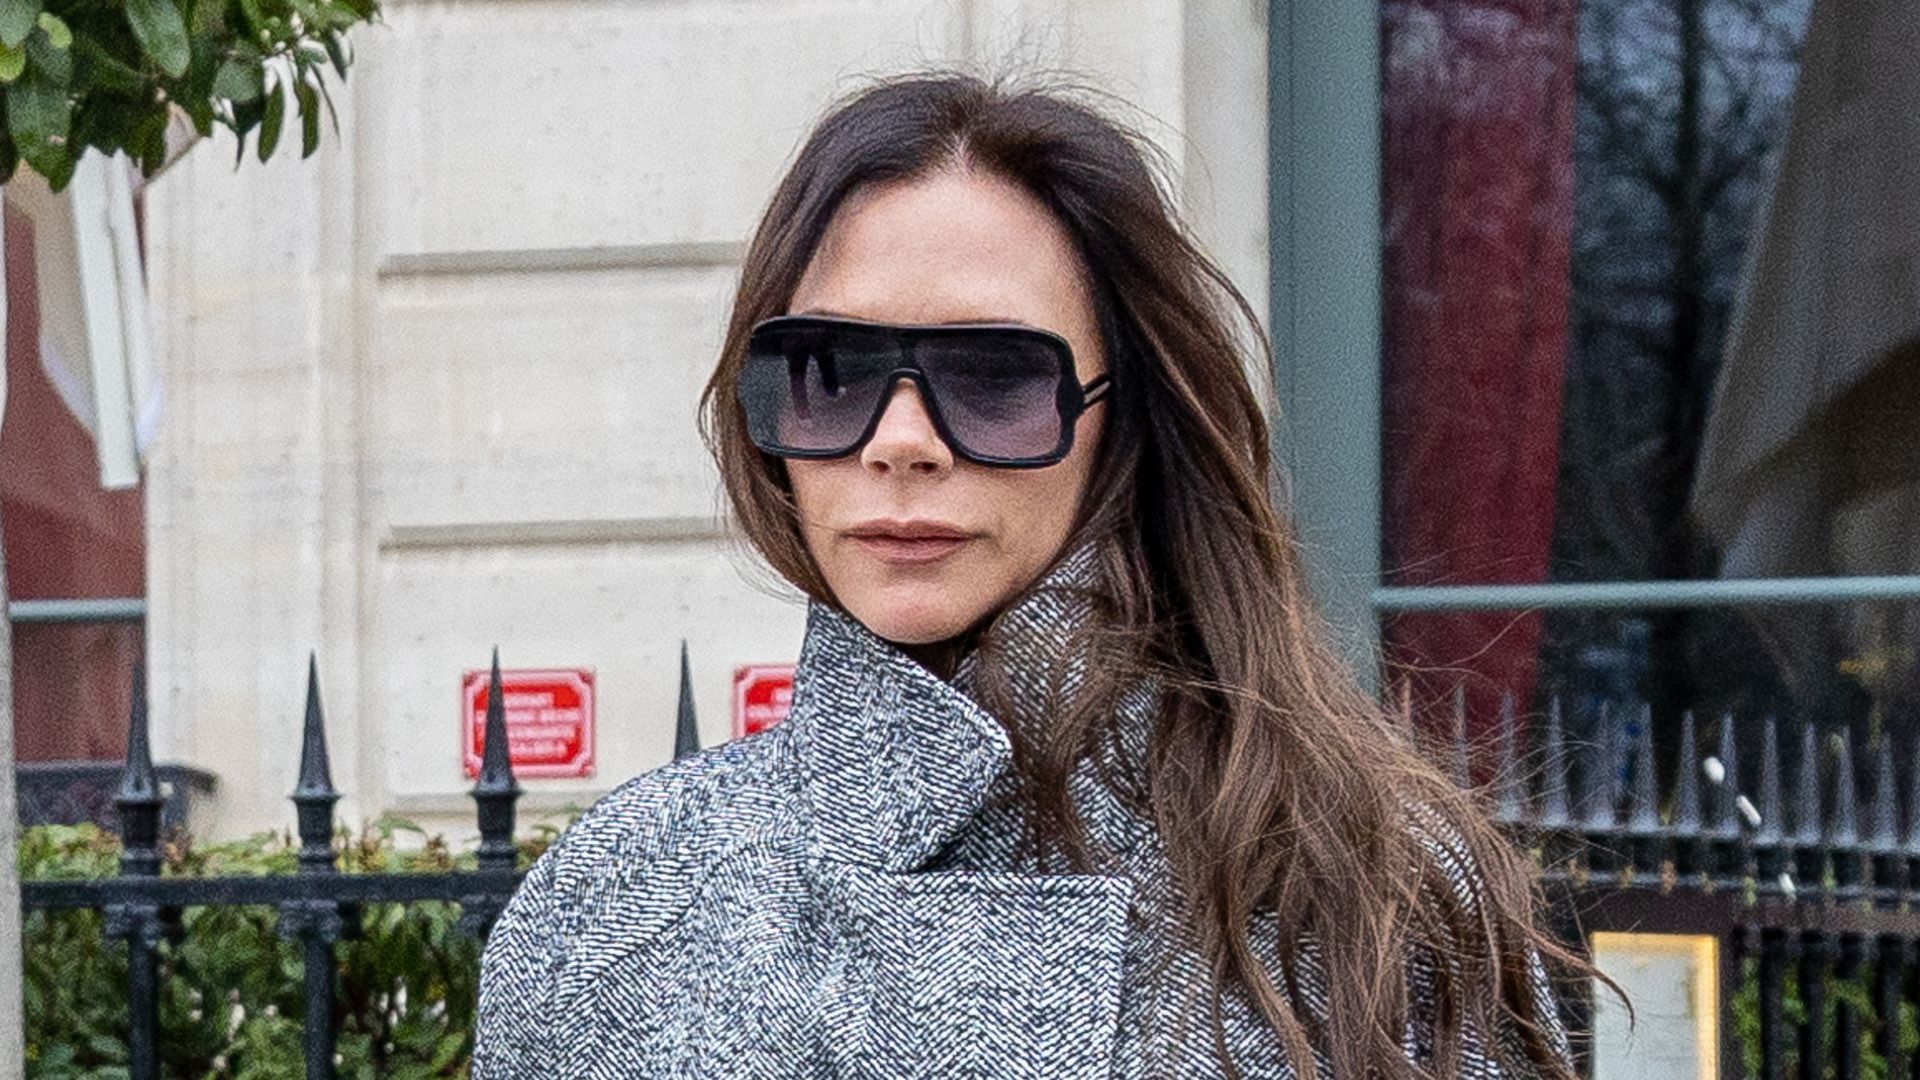 Victoria Beckham wrapped up in a warm coat